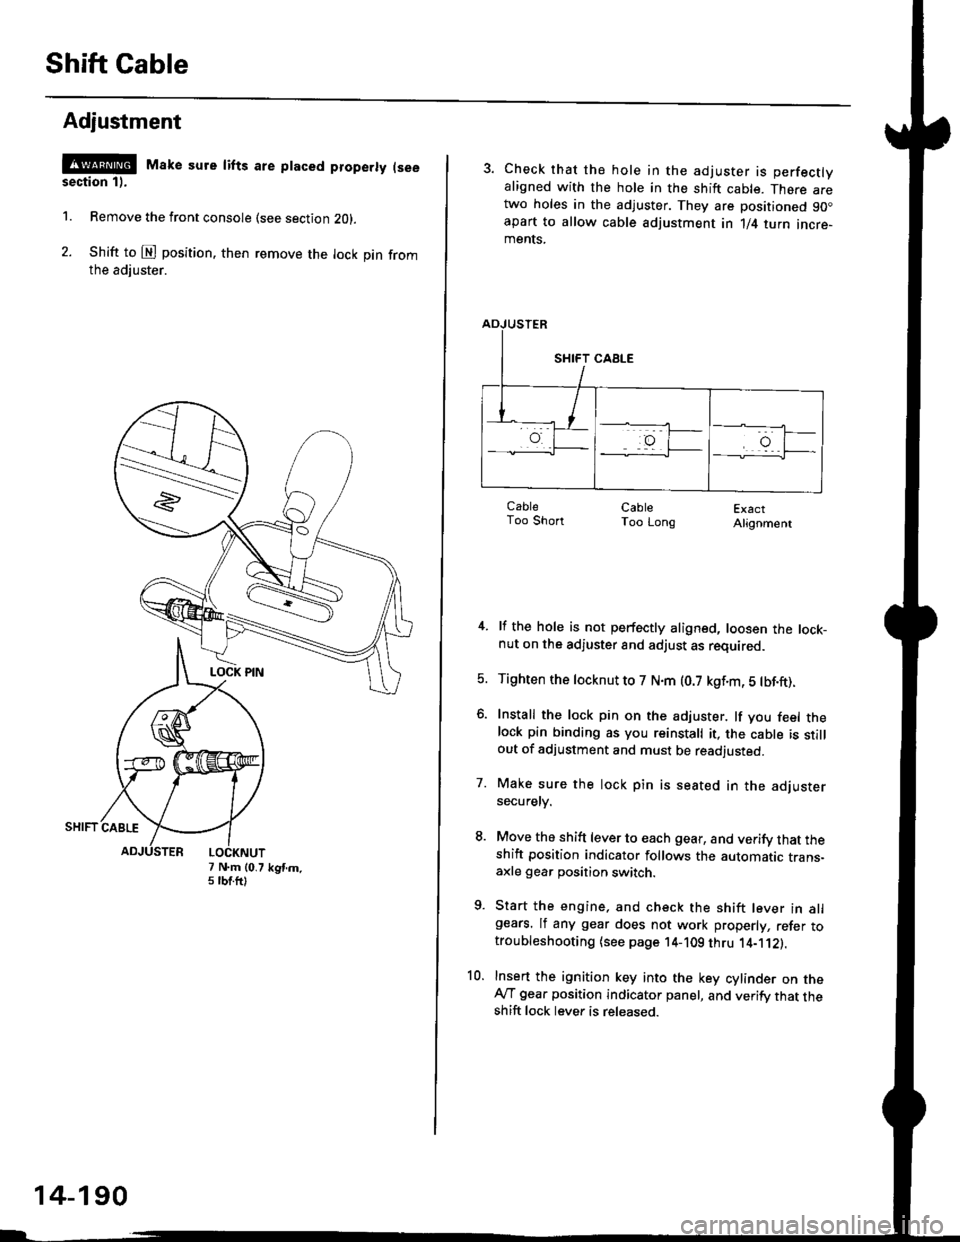 HONDA CIVIC 1997 6.G Workshop Manual Shift Cable
Adjustment
@ Make sure lifts are ptaced properly (see
section 1).
1. Remove the front console (see section Z0l.
2. Shift to @ position. then remove the lock pin fromthe adiuster.
7 N.m (0.